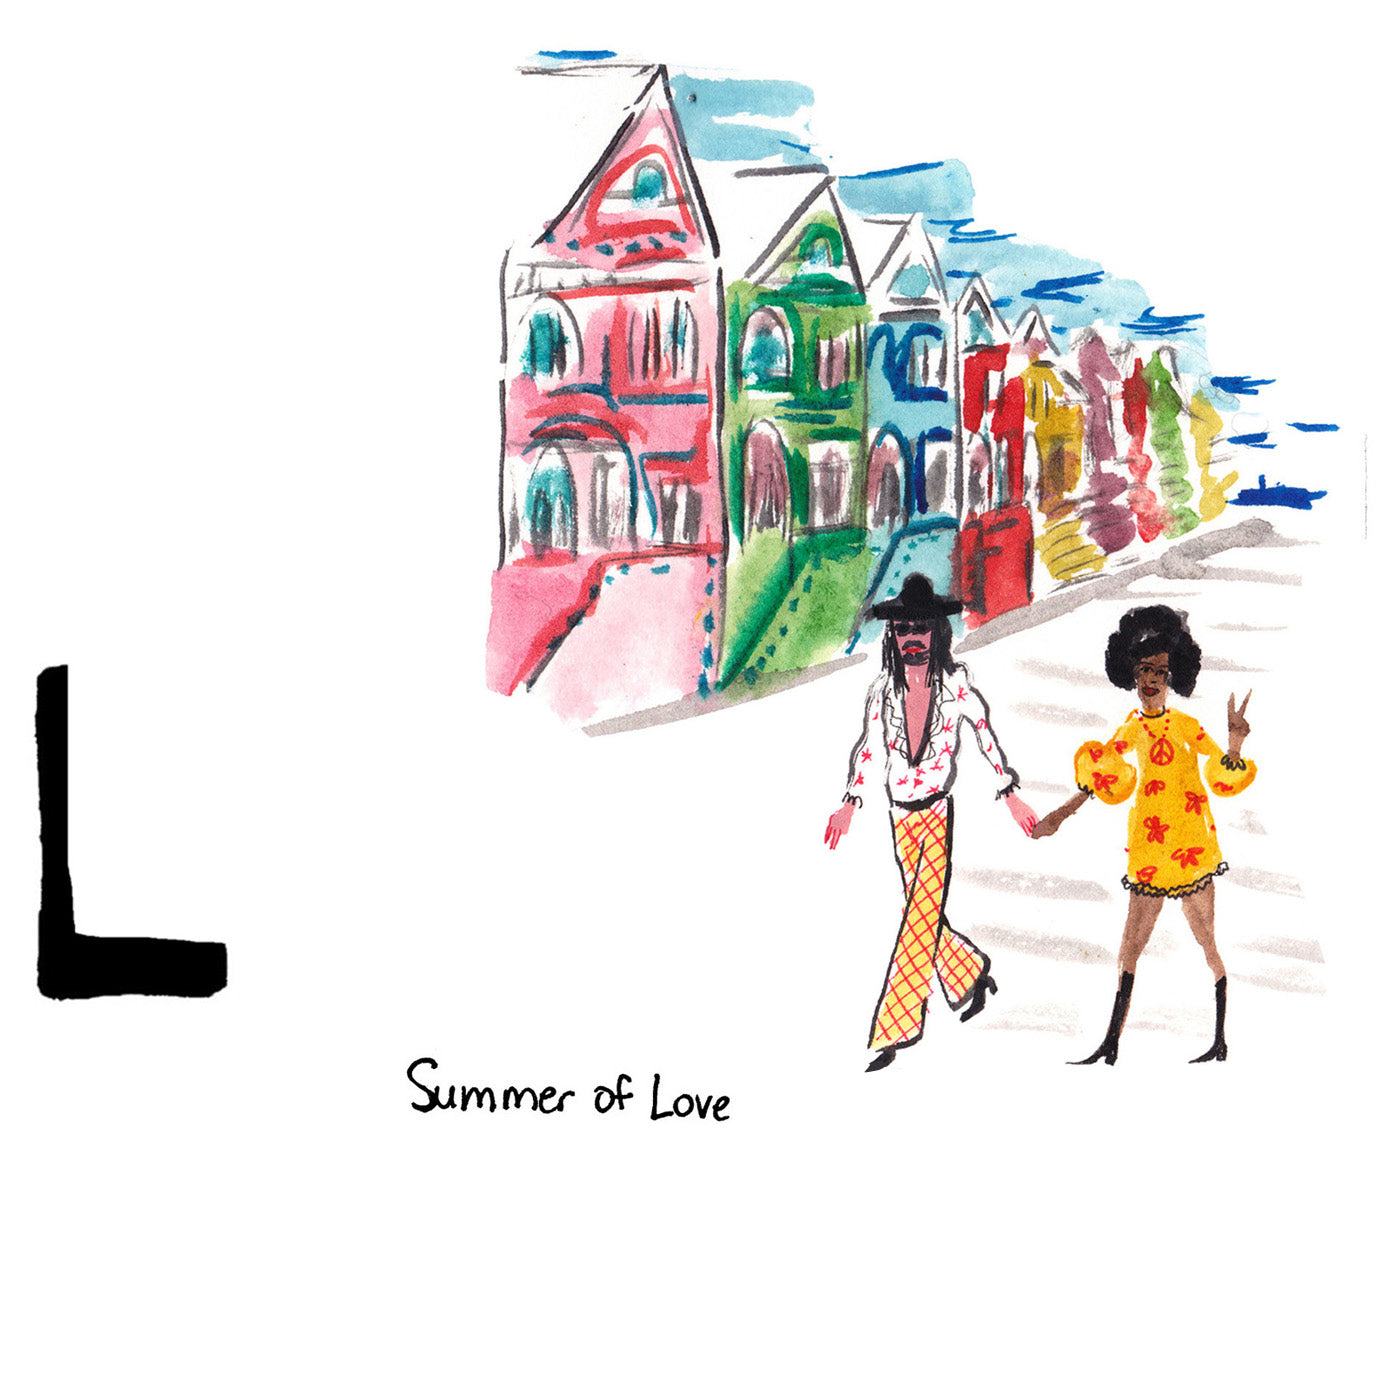 L is for Summer of Love. Over 100,000 people were reported to have traveled to San Francisco’s Haight-Ashbury neighborhood to peacefully demonstrate in response to the government's contentious involvement in the Vietnam War during the Summer of 1967, coining it ‘The Summer of Love.’